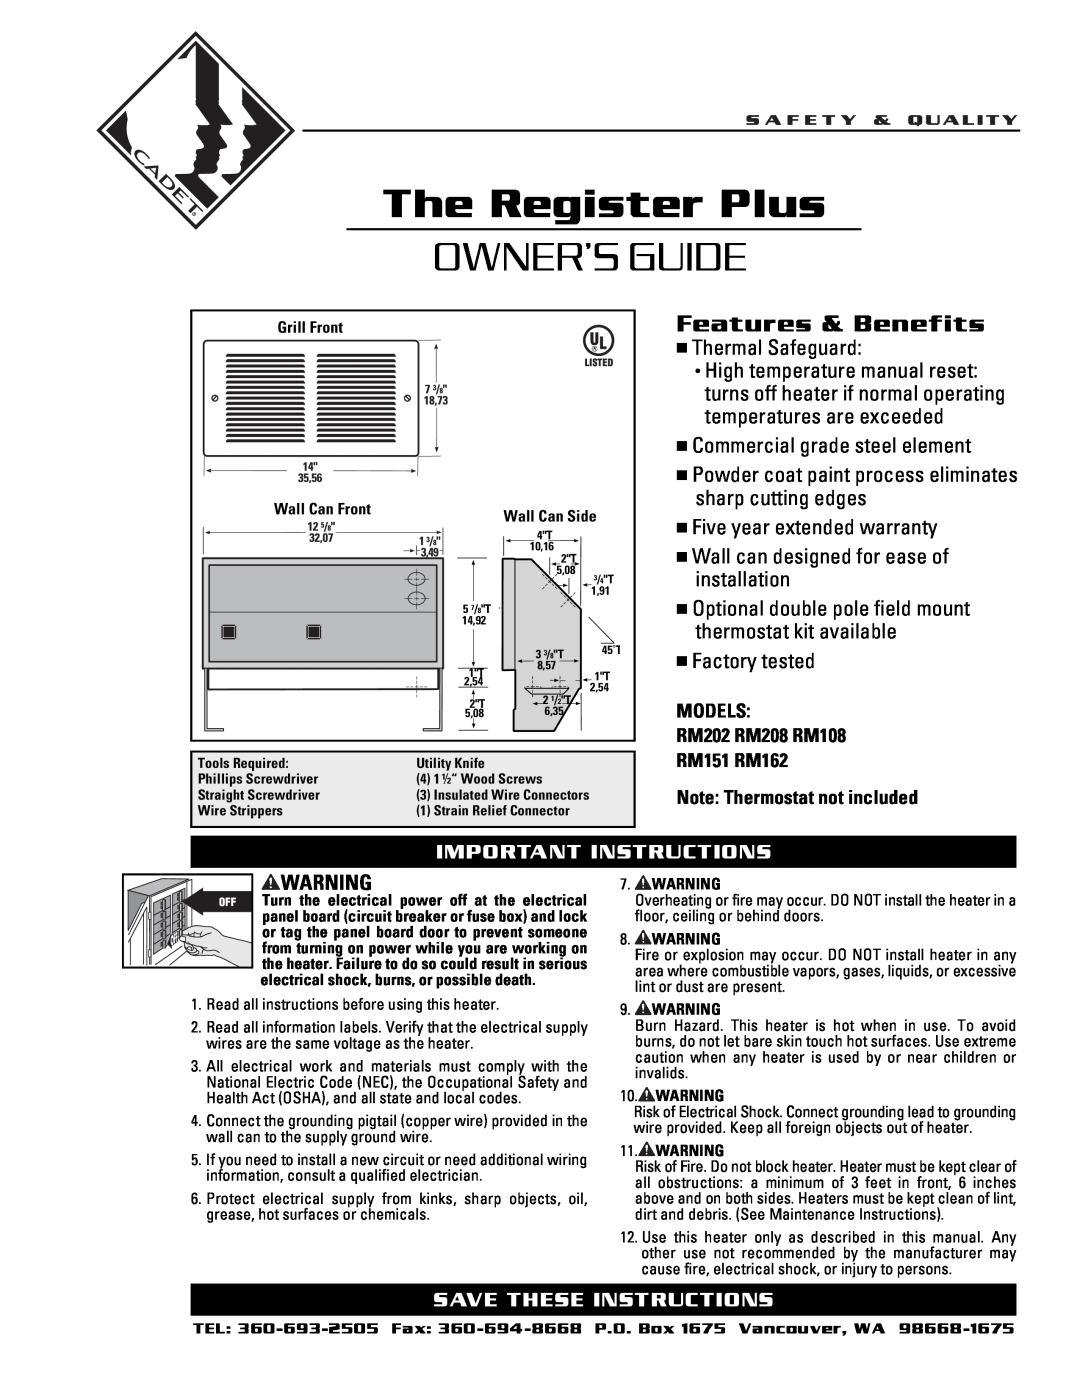 Cadet RM162 warranty The Register Plus, Owner’S Guide, Features & Benefits, Thermal Safeguard, Five year extended warranty 